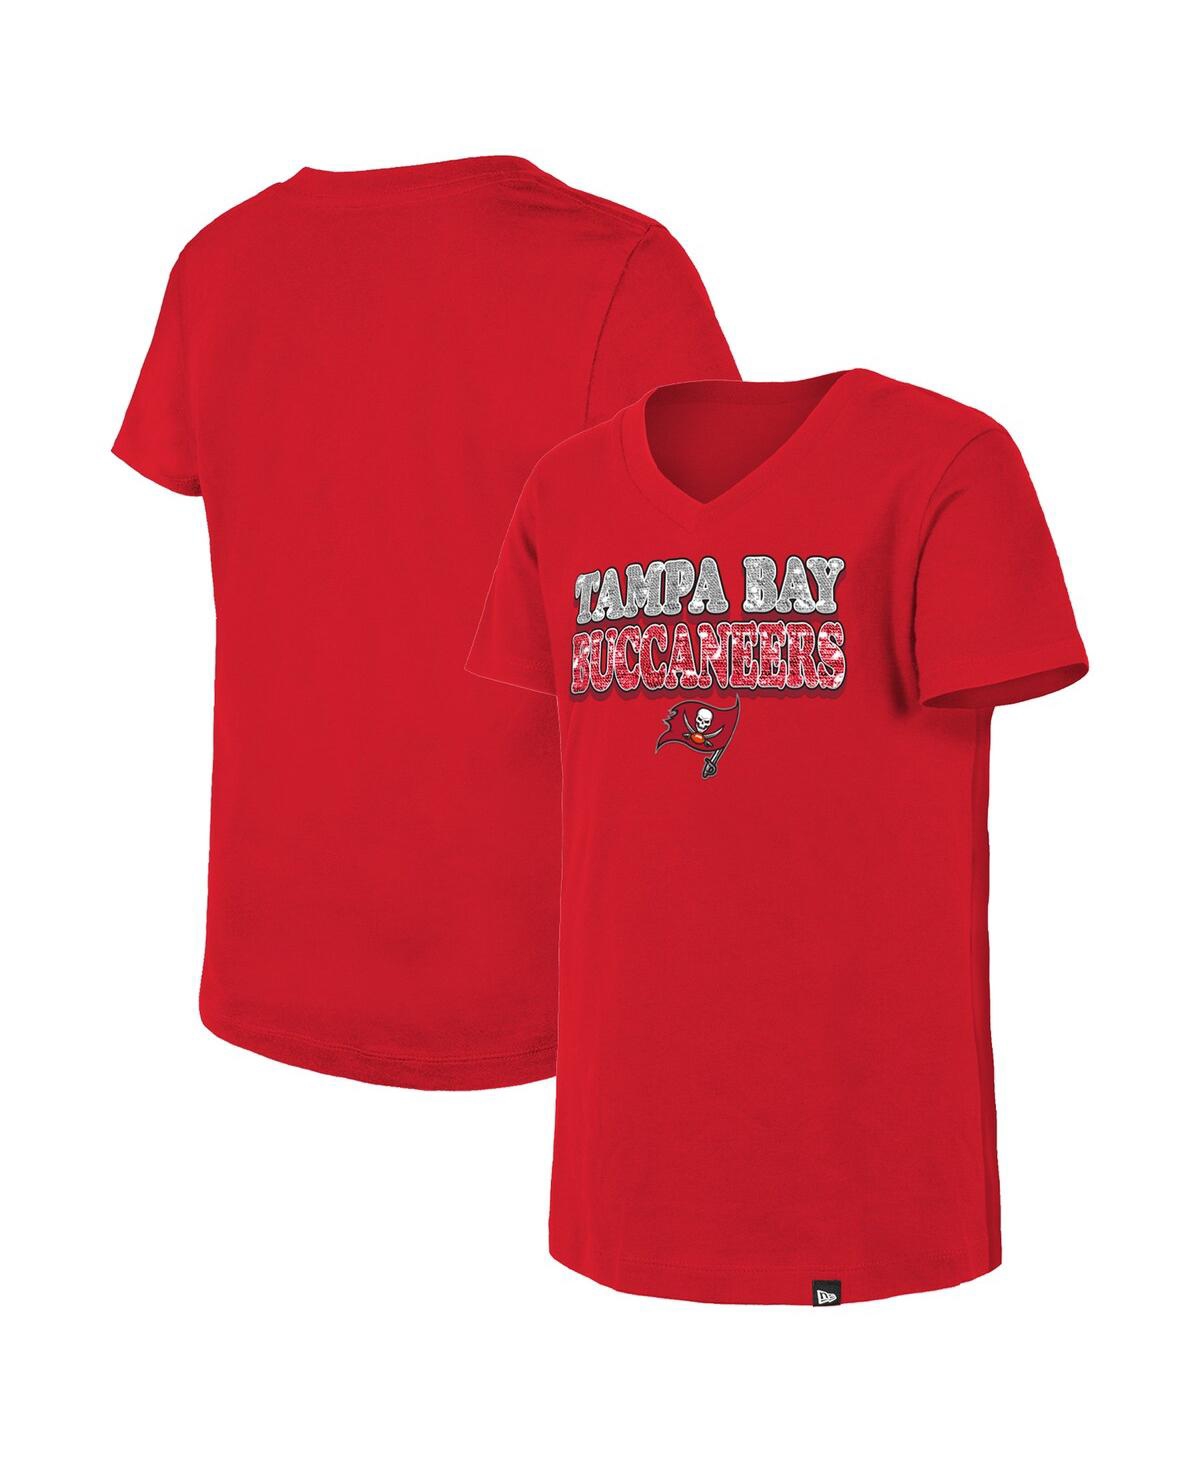 Shop New Era Girls Youth  Red Tampa Bay Buccaneers Reverse Sequin V-neck T-shirt